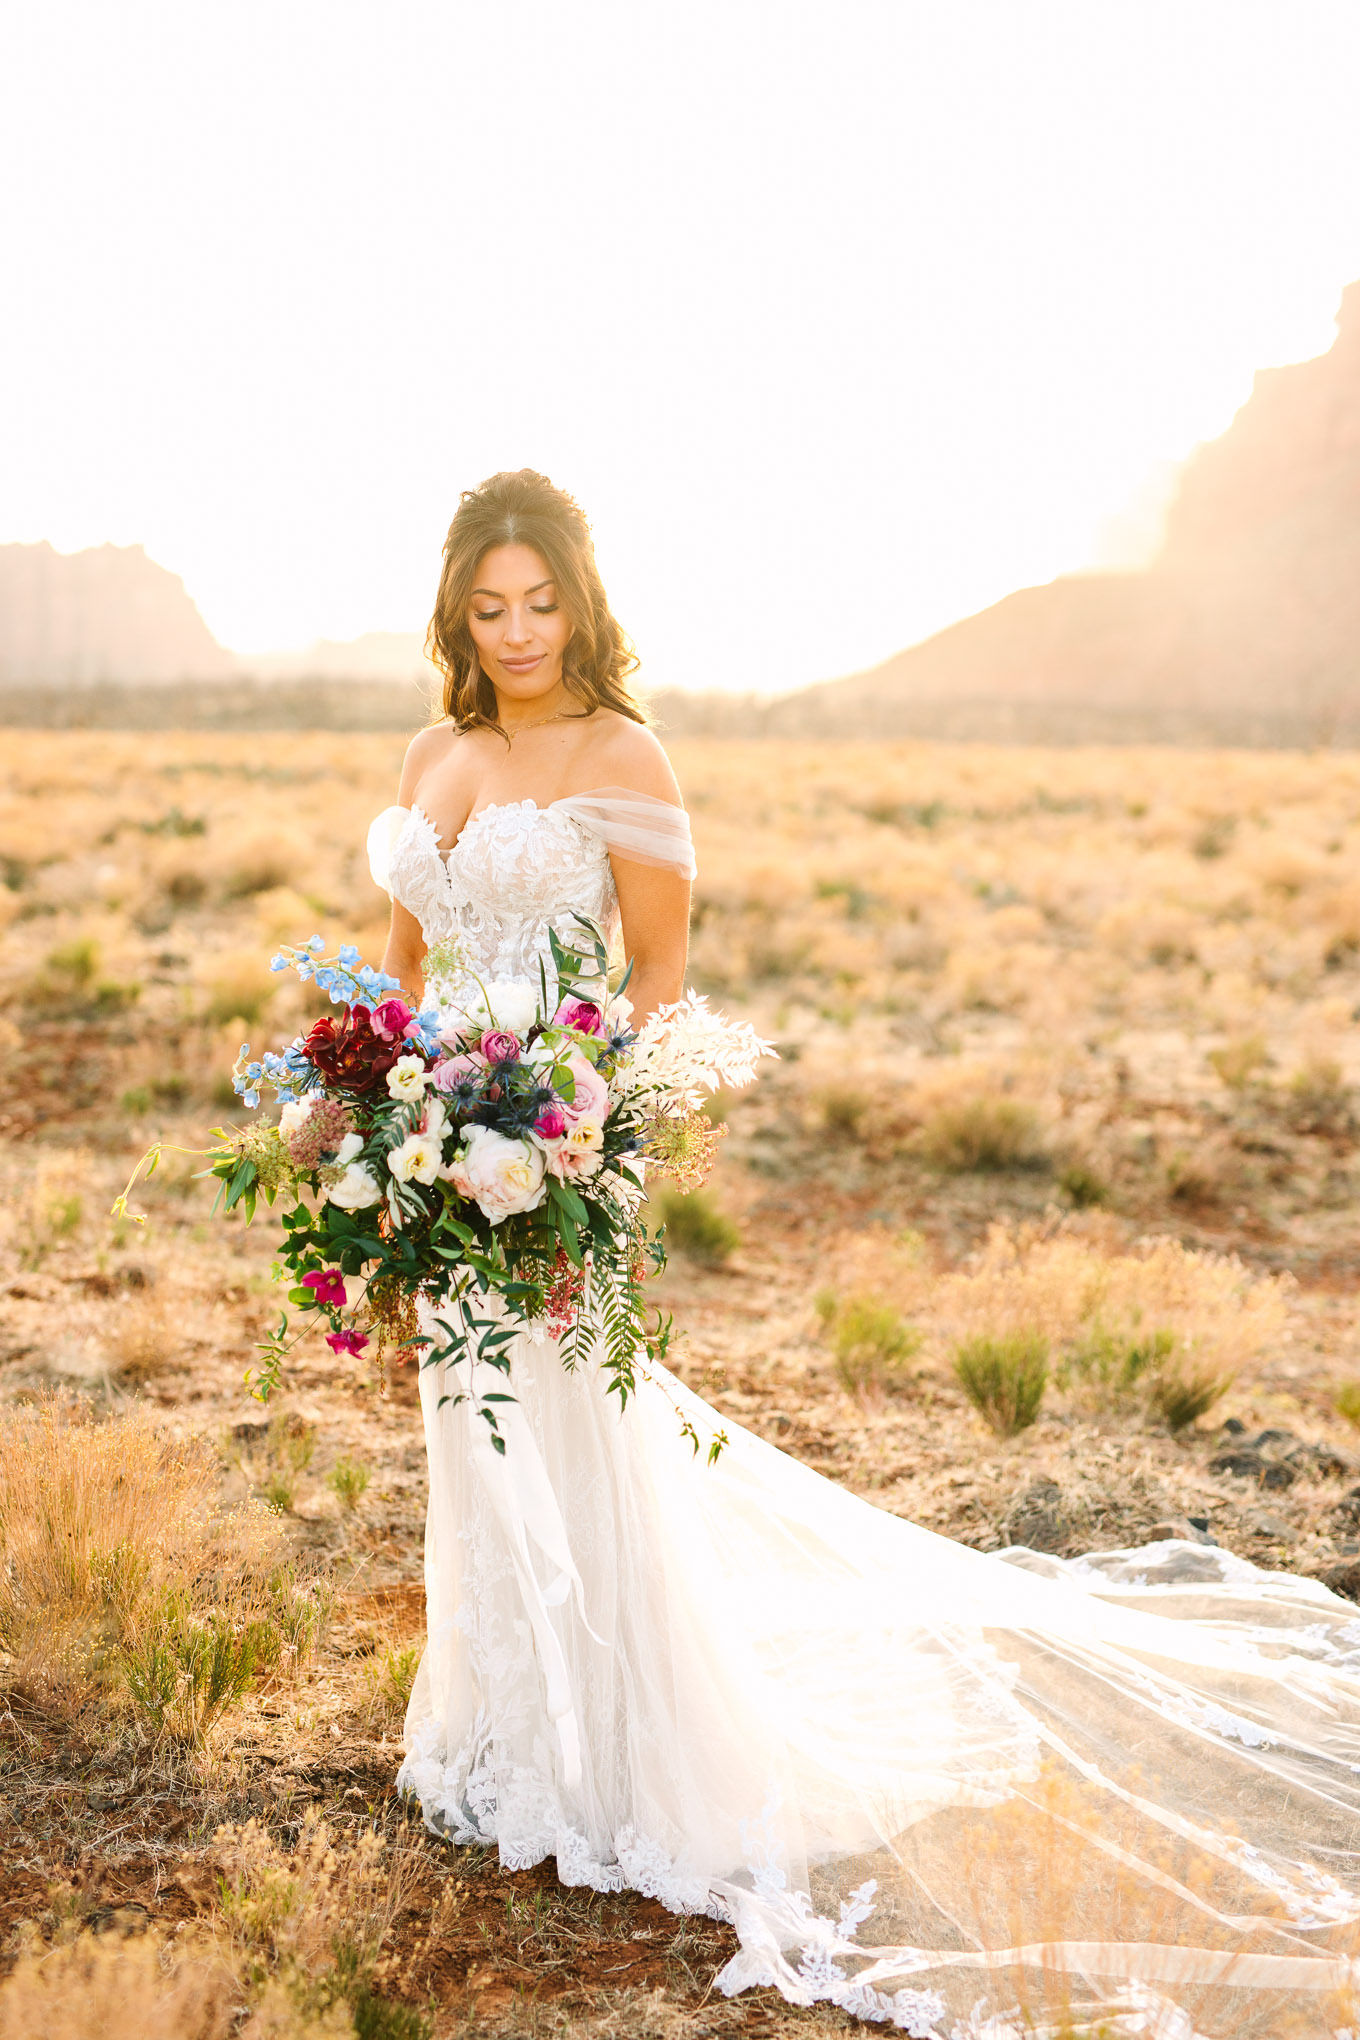 Bridal portrait with colorful bouquet | Zion Under Canvas camping elopement at sunrise | Colorful elopement photography | #utahelopement #zionelopement #zionwedding #undercanvaszion #sunriseelopement #adventureelopement  Source: Mary Costa Photography | Los Angeles